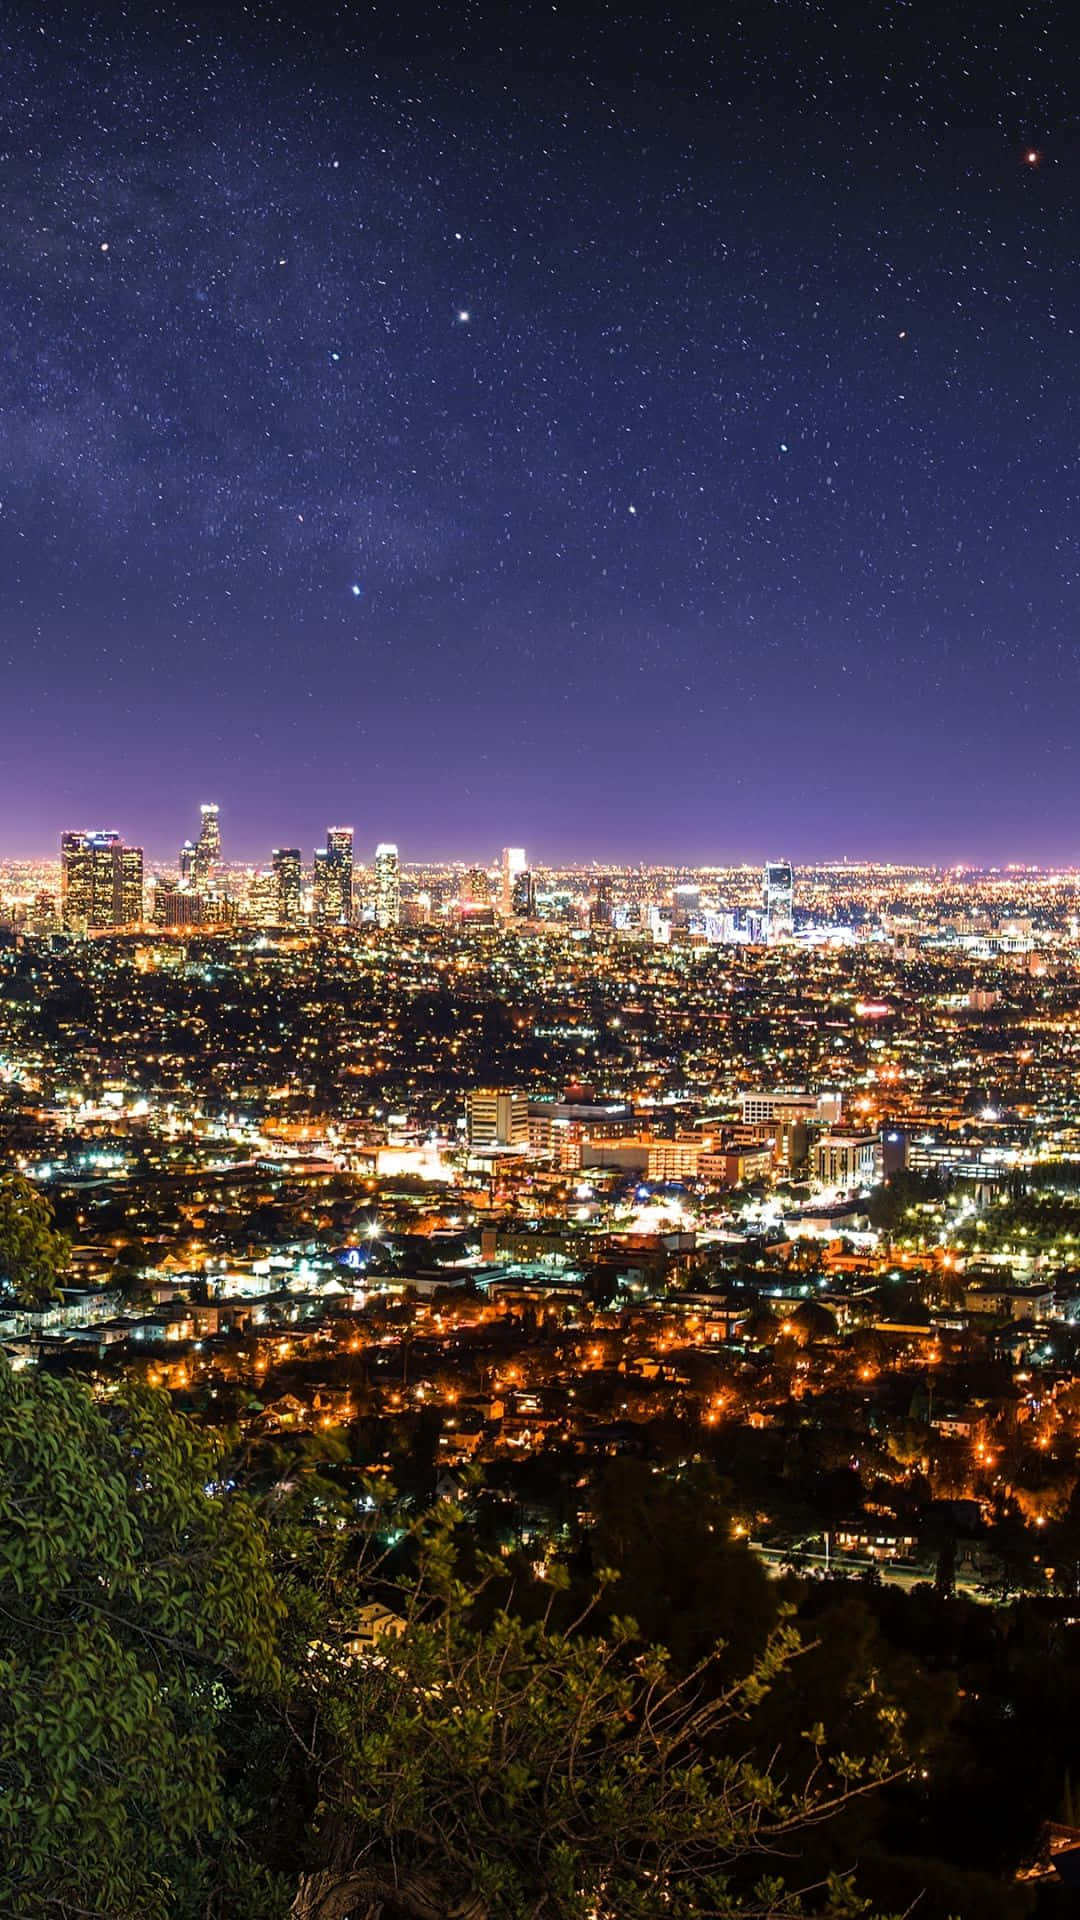 Enjoy a mesmerizing skyline of Los Angeles from the comfort of your iPhone! Wallpaper